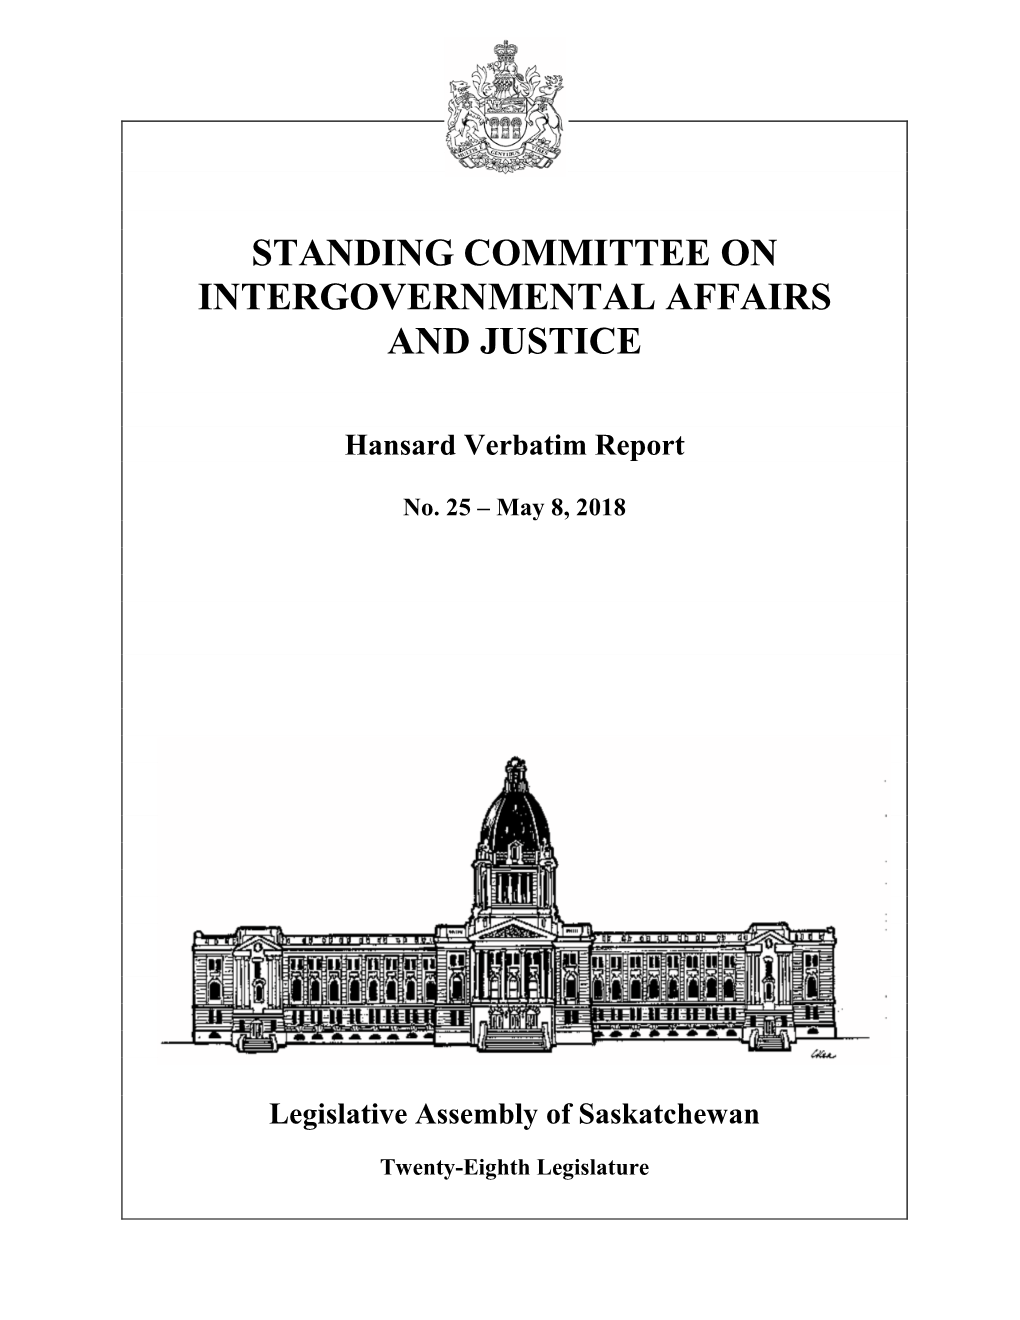 May 8, 2018 Intergovernmental Affairs and Justice Committee 377